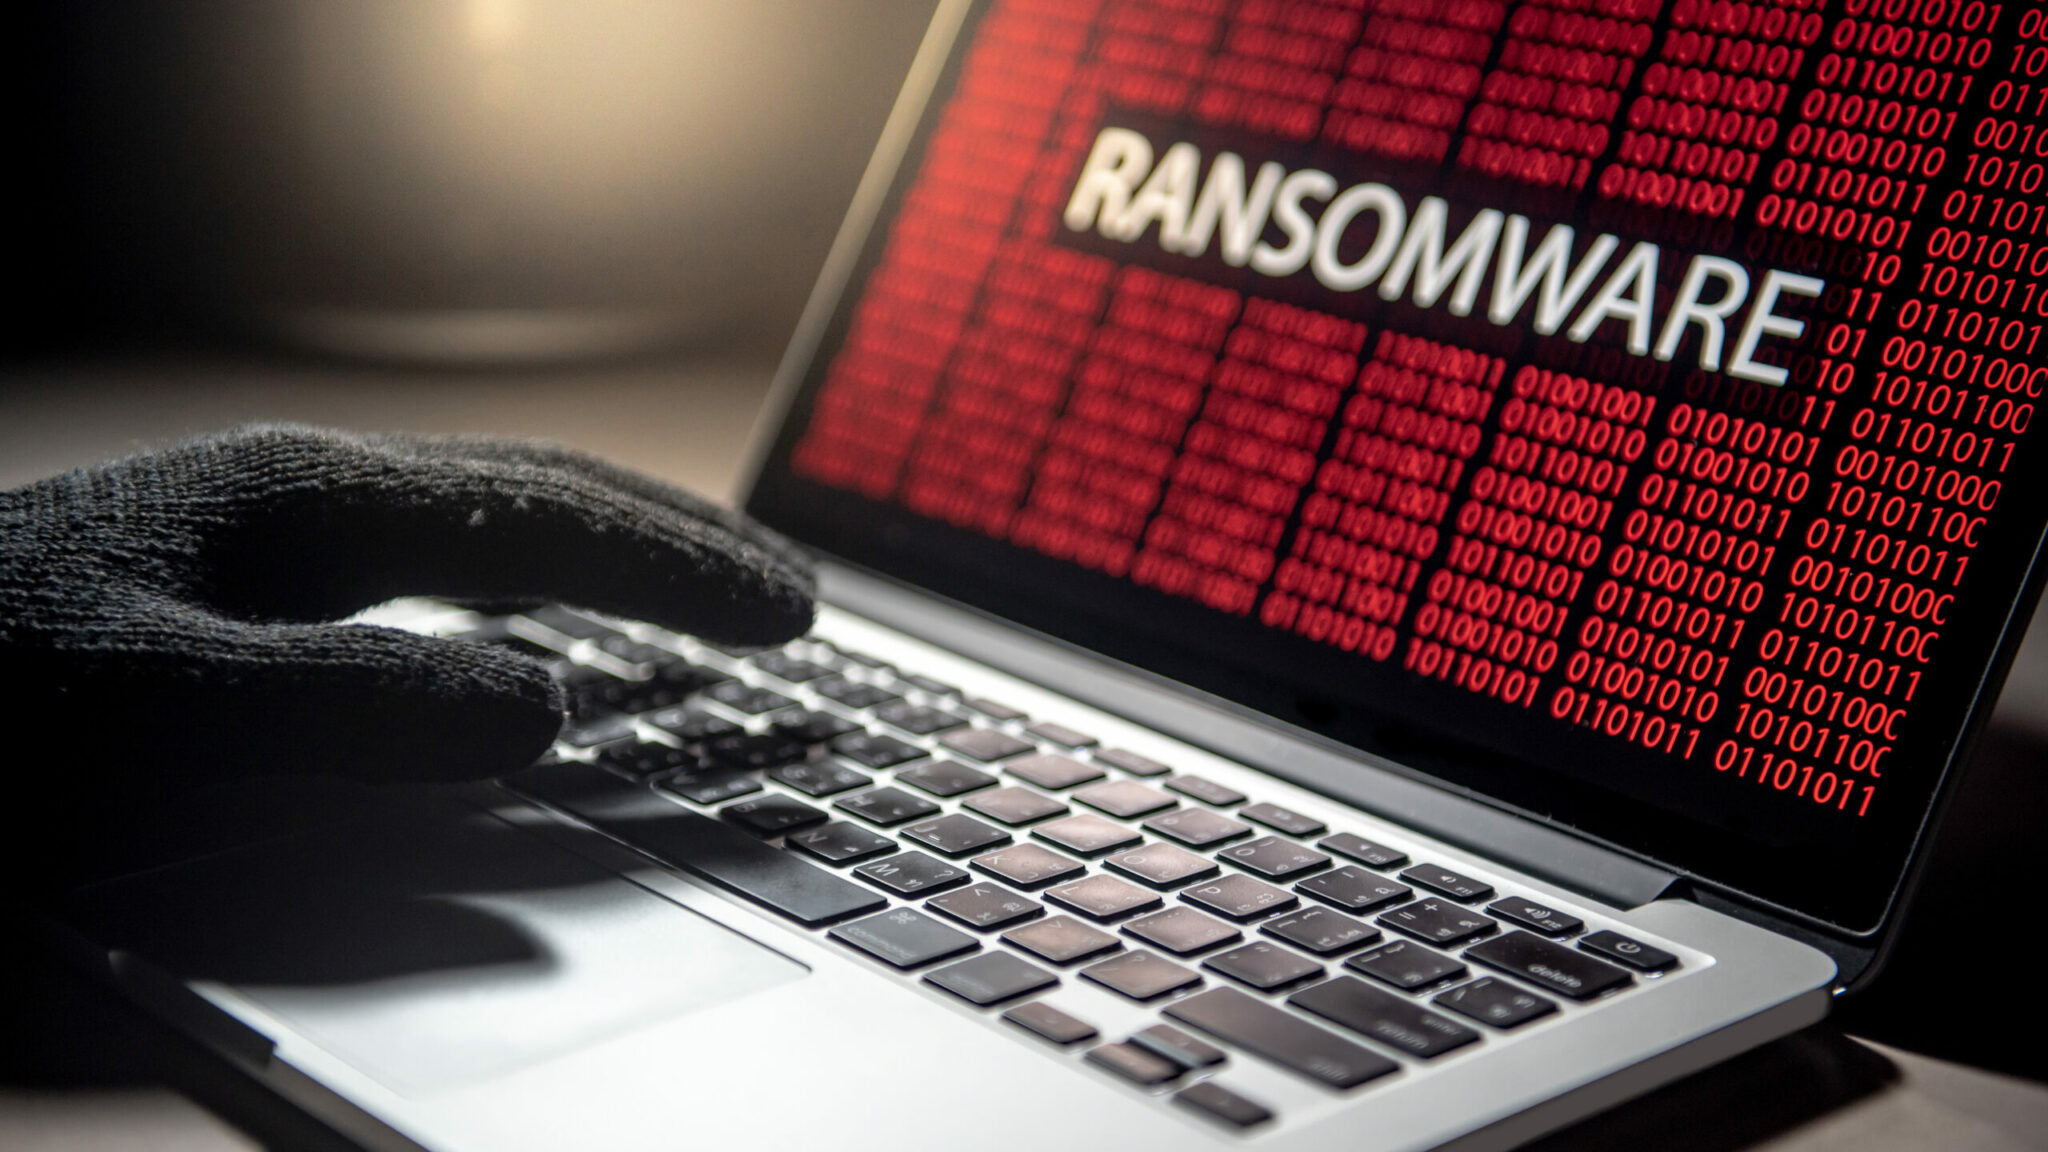 ransomware, hackers, cyber criminals